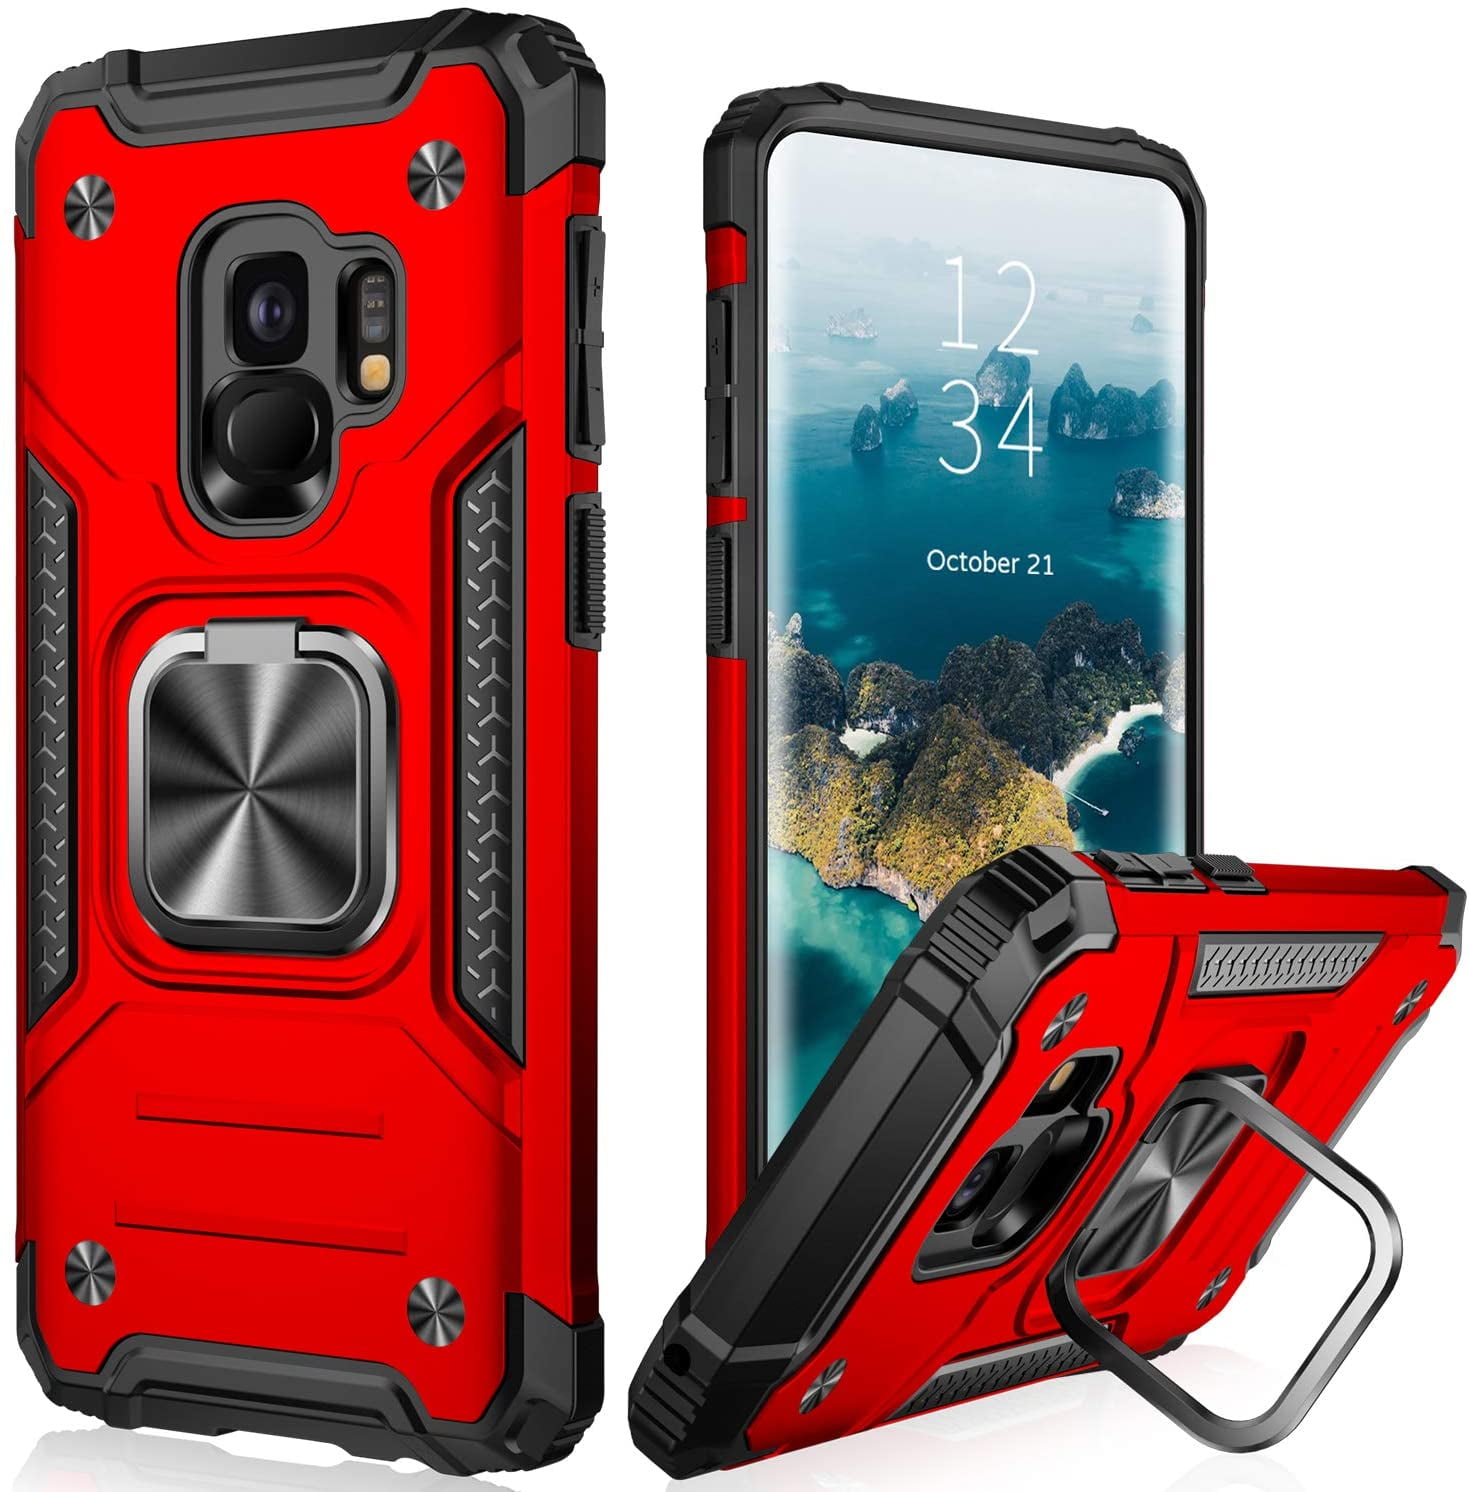 Elastisch viering verkiezing SAYTAY Galaxy S9 Case,Samsung S9 Cover Dual Layer Soft Flexible TPU and  Hard PC Anti-Slip Full-Body Rugged Protective Phone Case with Magnetic  Kickstand for Samsung Galaxy S9 - Walmart.com